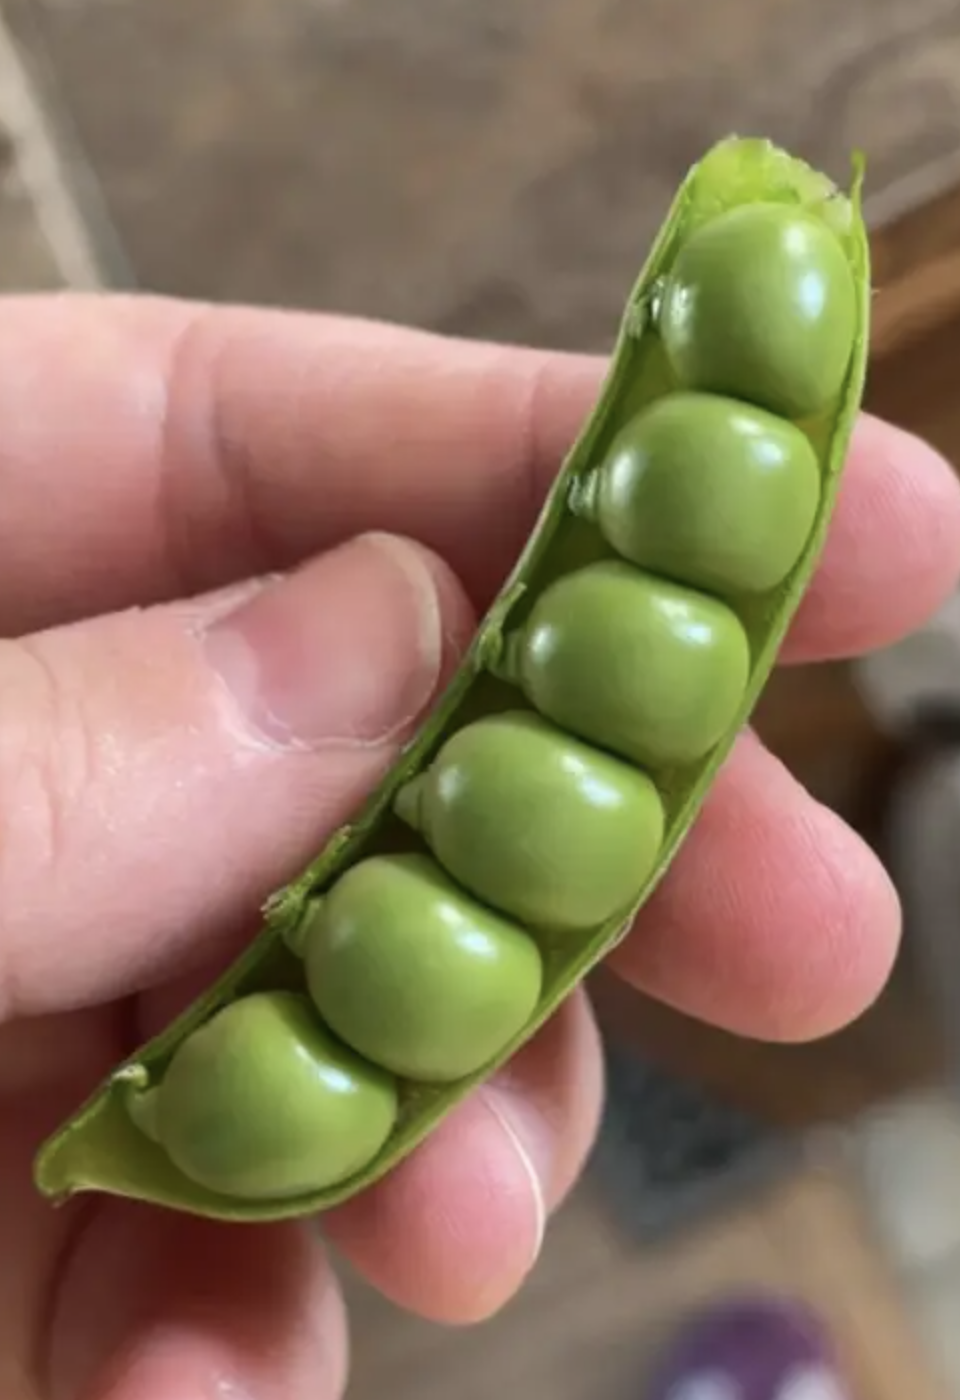 Hand holding an open pea pod with six visible peas inside